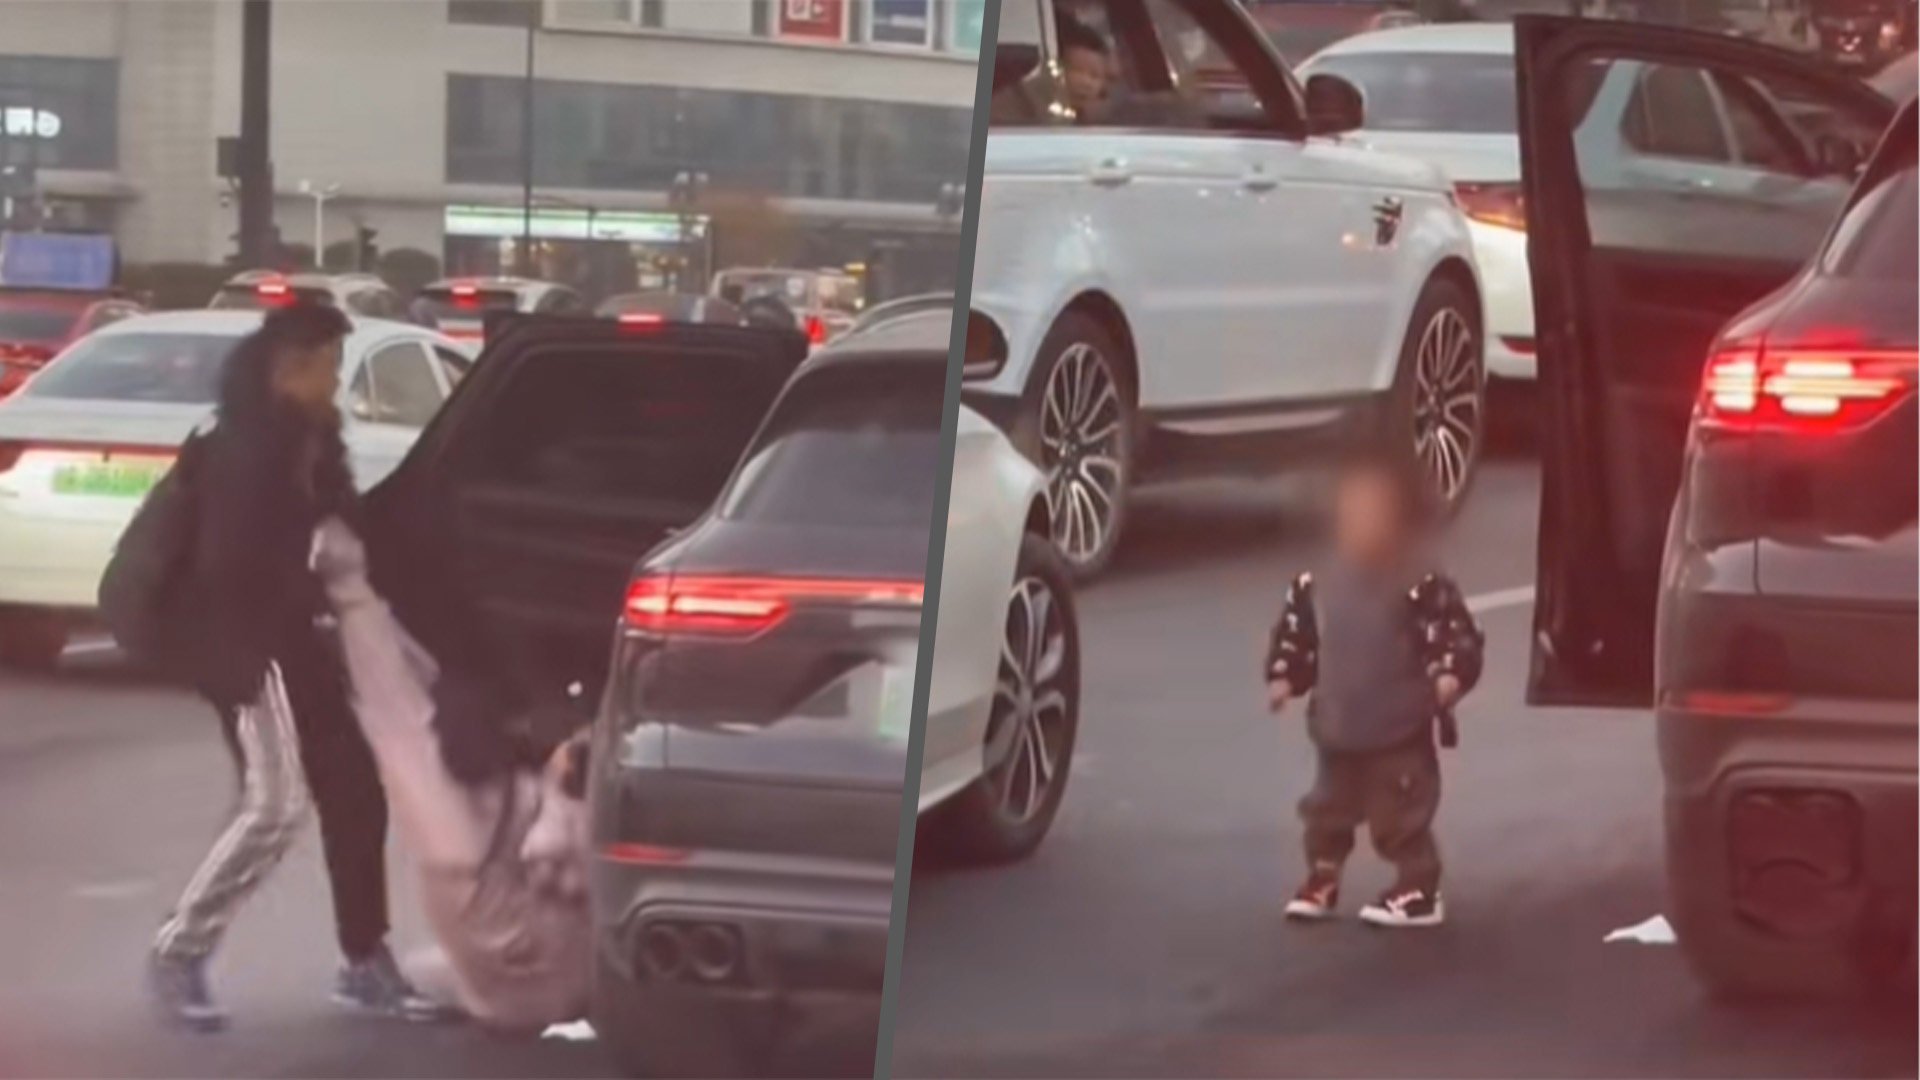 During an argument, a man in China forcefully pulled his wife who was holding their toddler son out of his car, unaware that his actions had left the boy unattended on a busy road. Photo: SCMP composite/Douyin